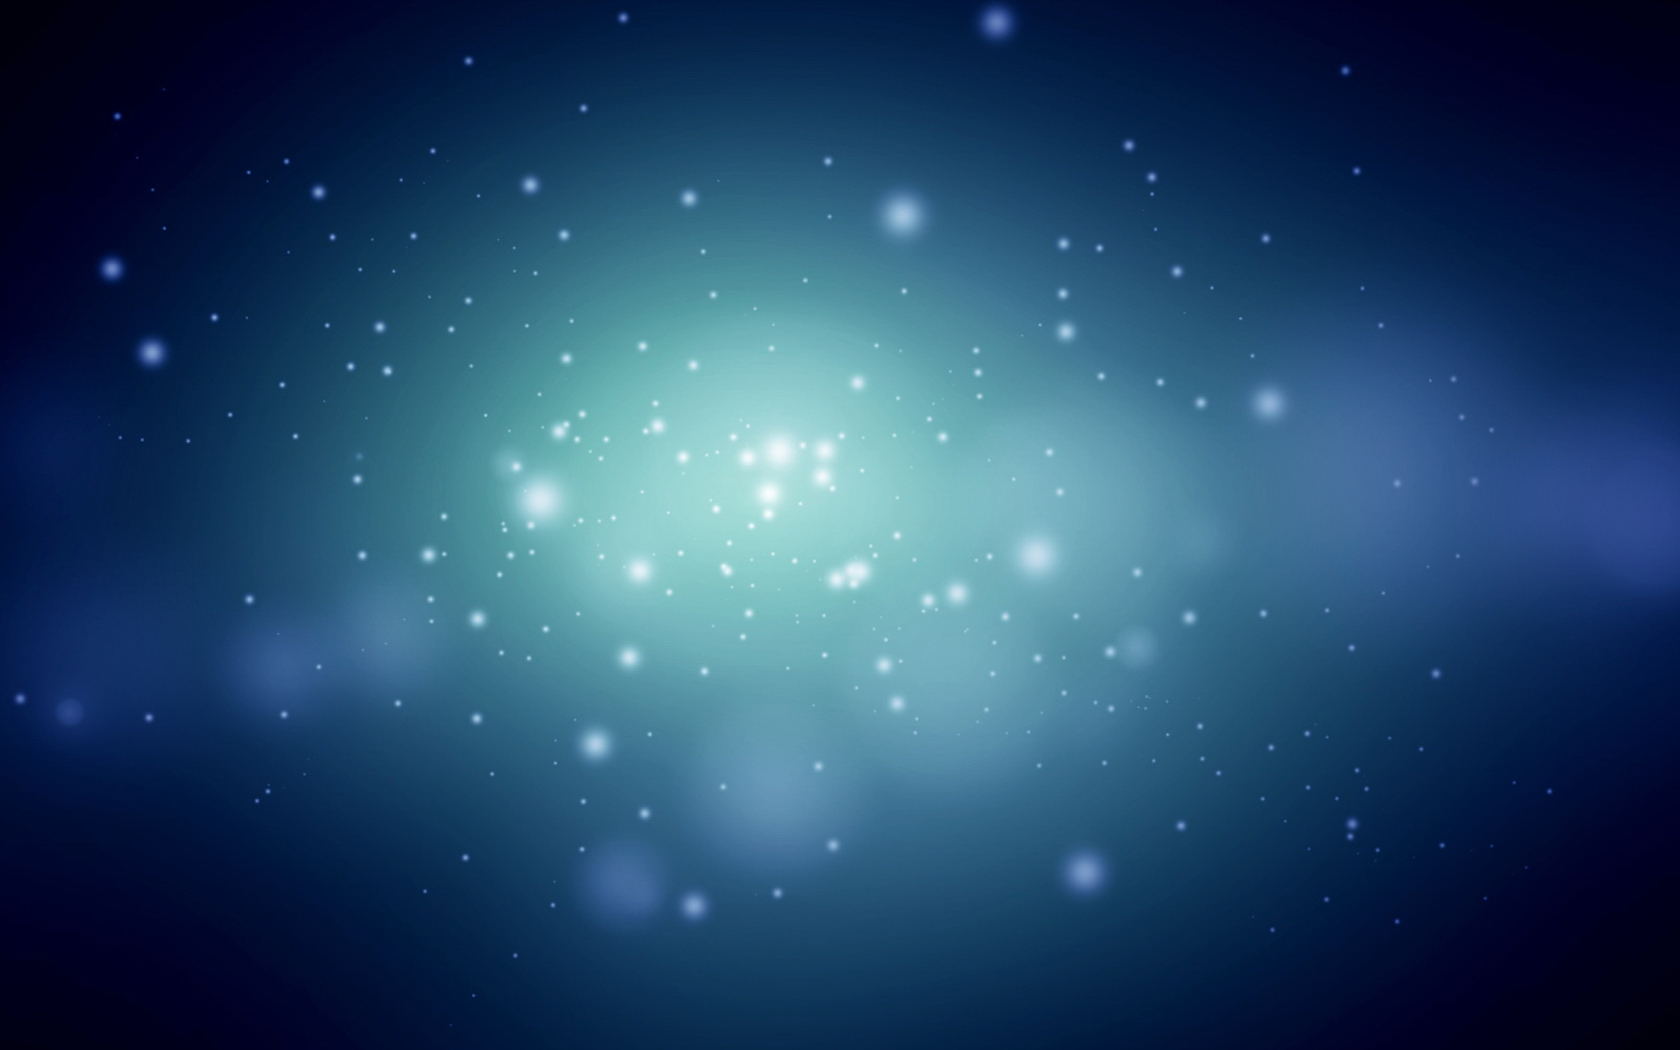 FREE SPACE BACKGROUNDS AND WALLPAPERS   Space Backgrounds